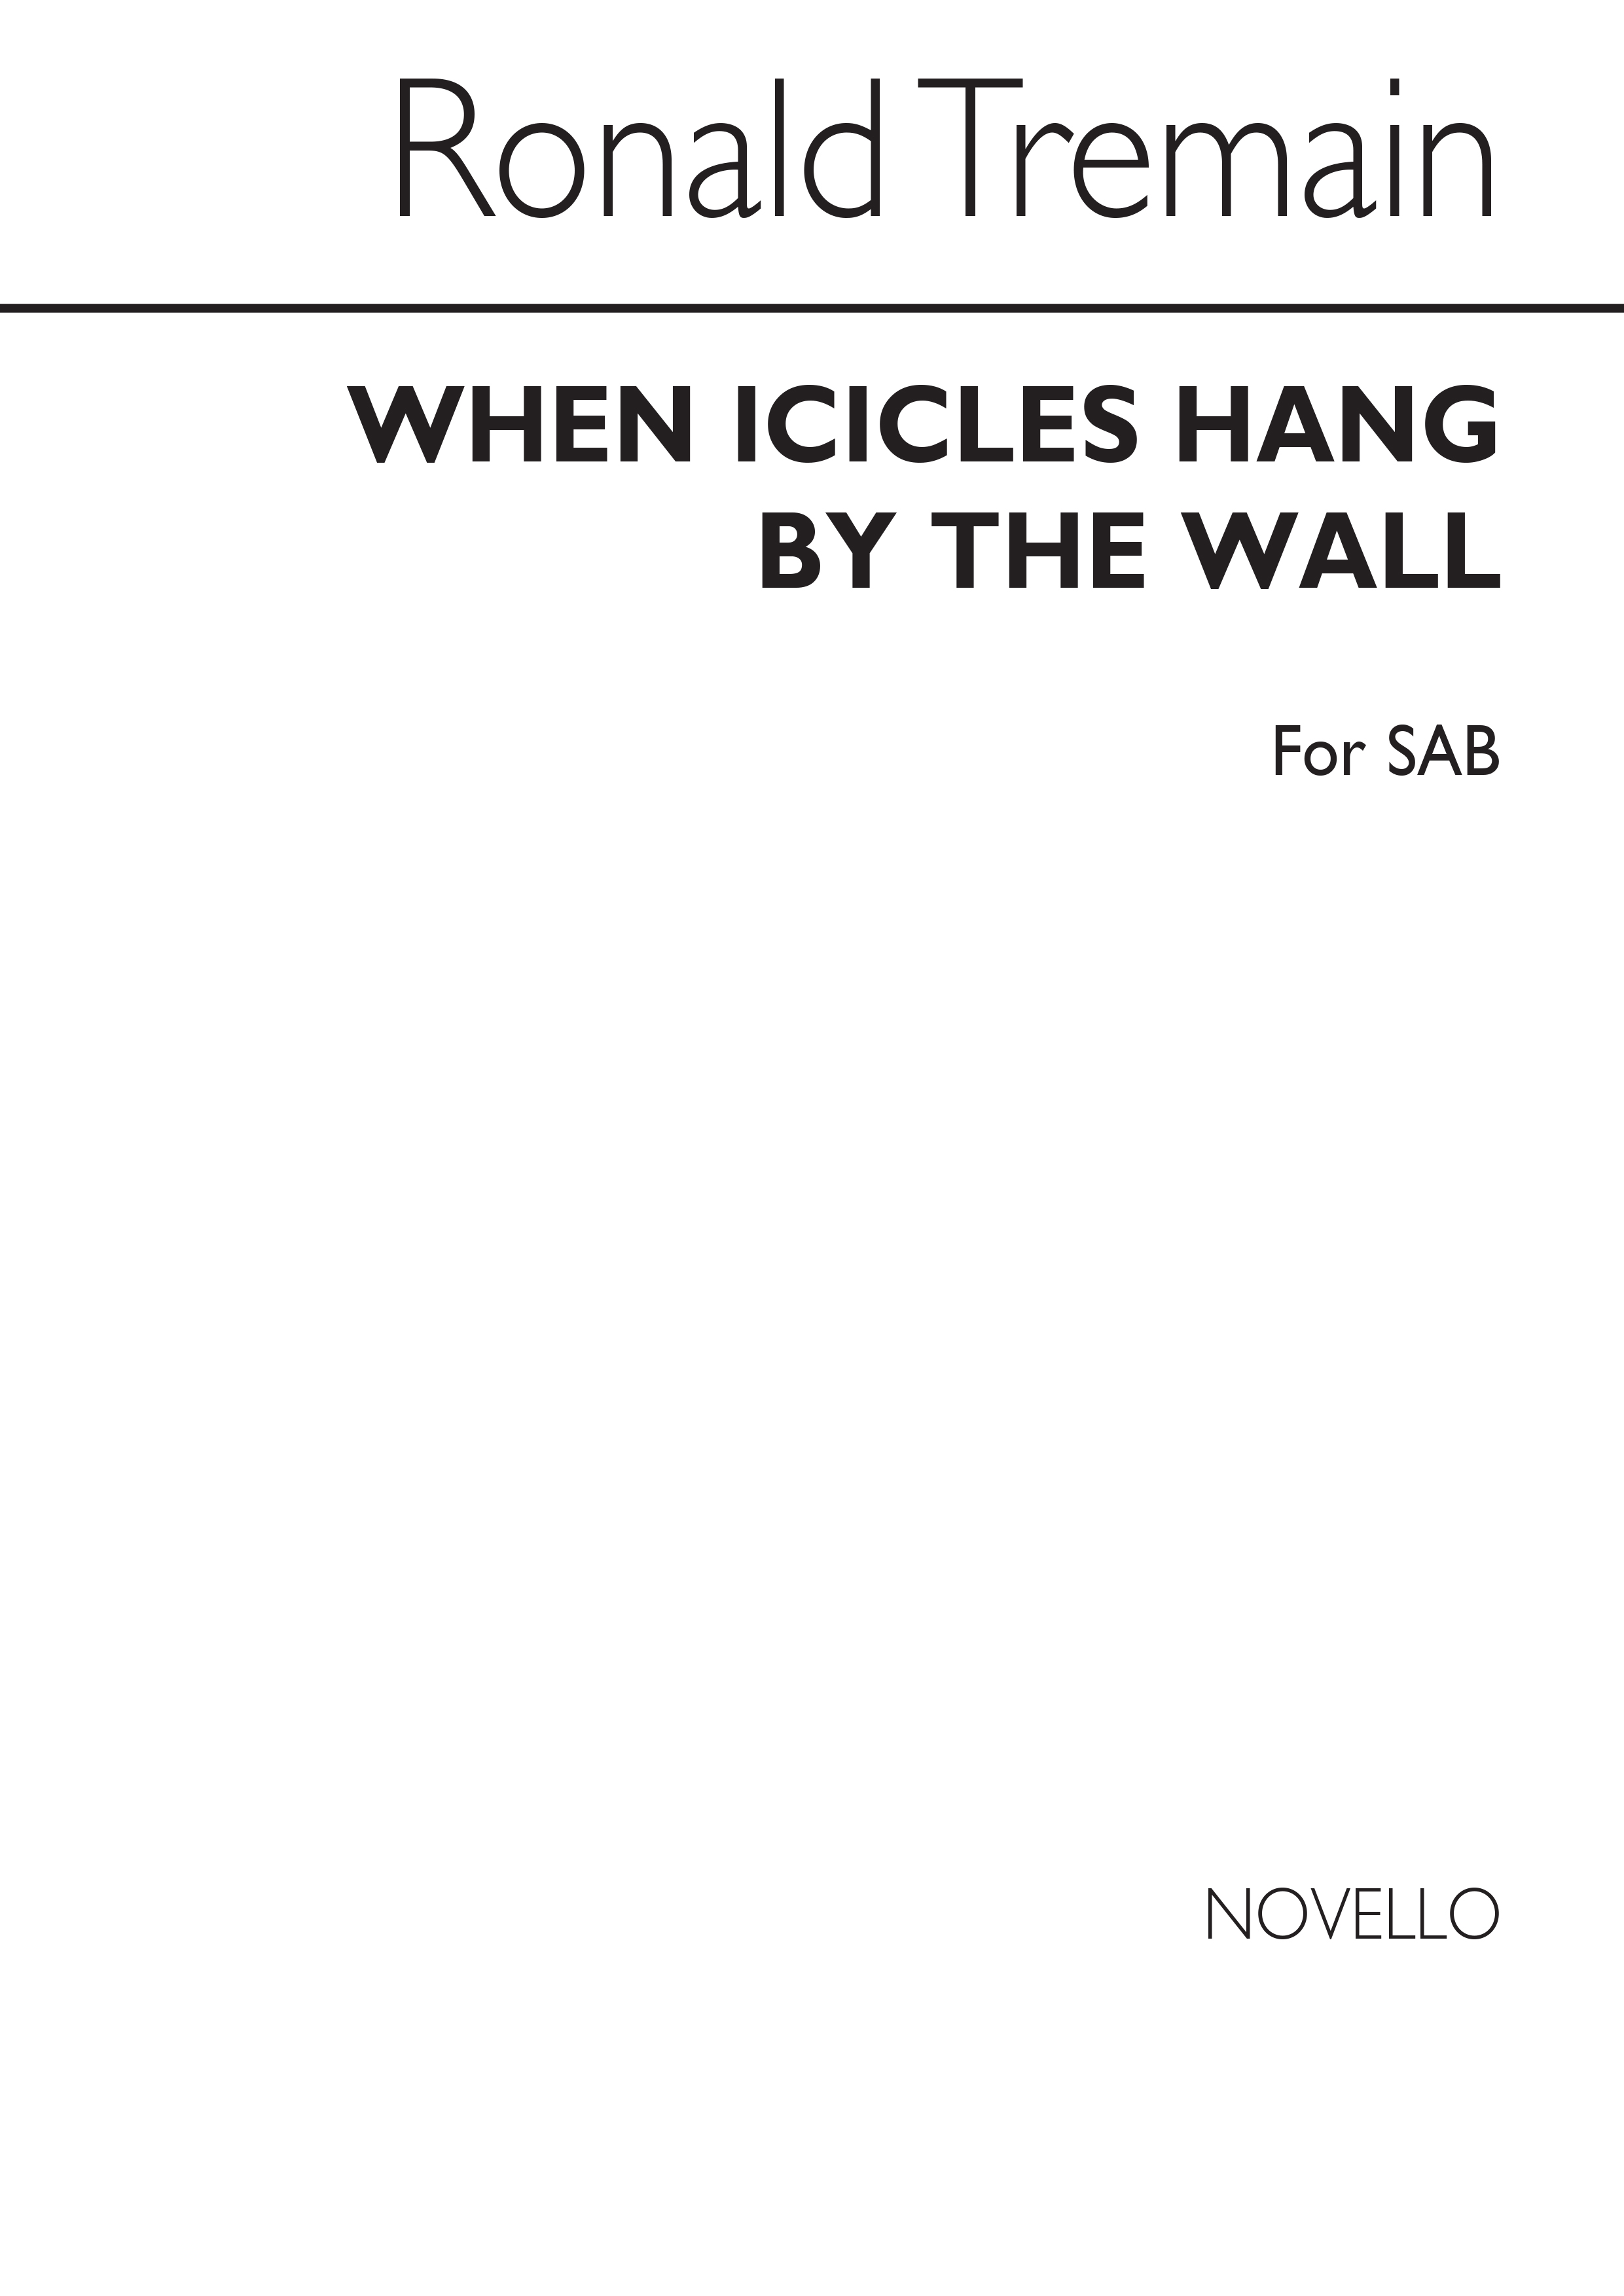 Shakespeare Ronald Tremain: When Icicles Hang By The Wall